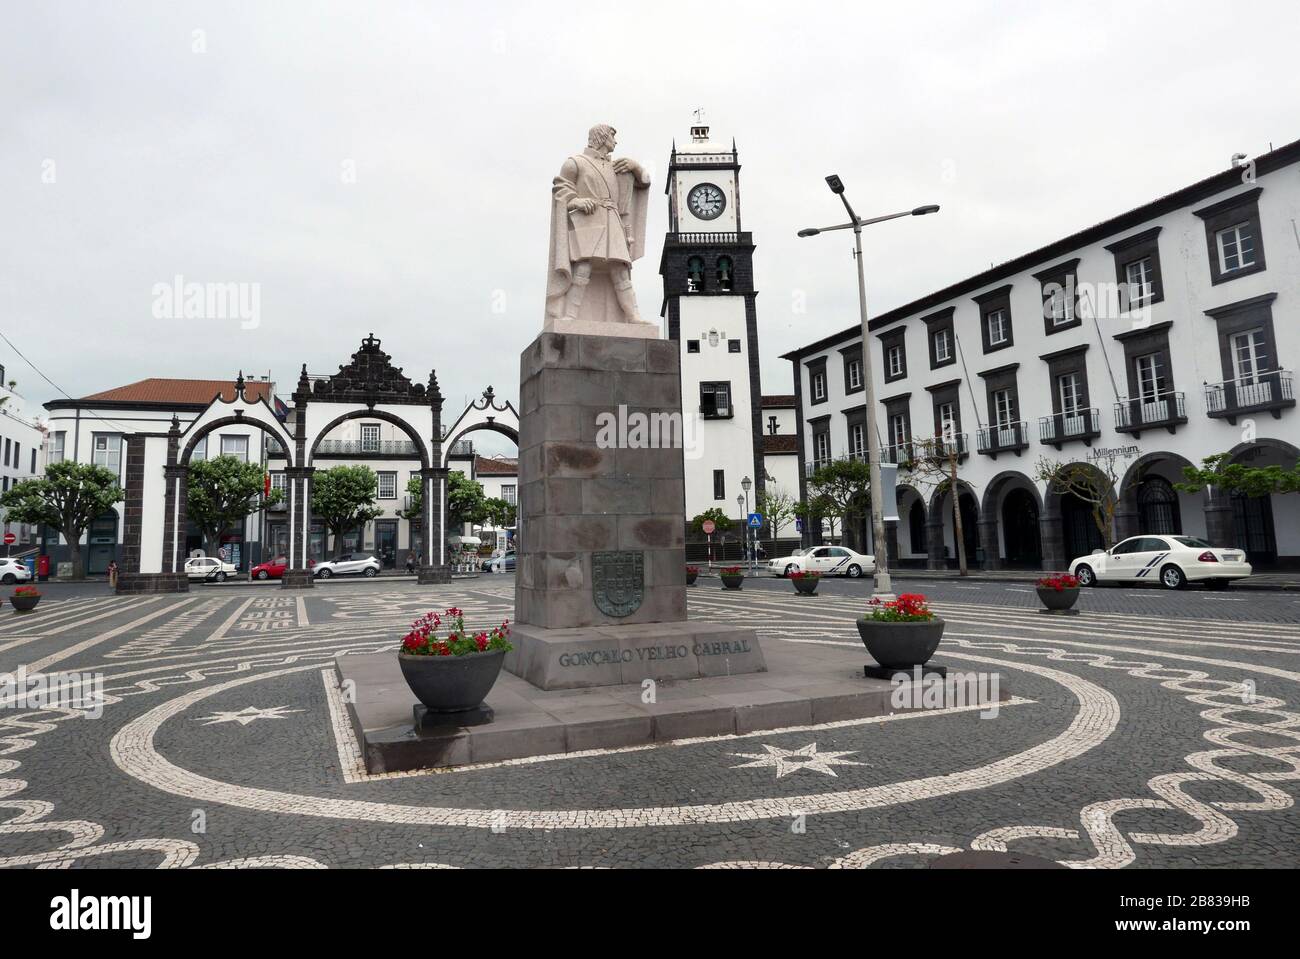 The statue of Gonçalo Velho Cabral in front of the City Gates in central Ponta Delgada Azores. Stock Photo